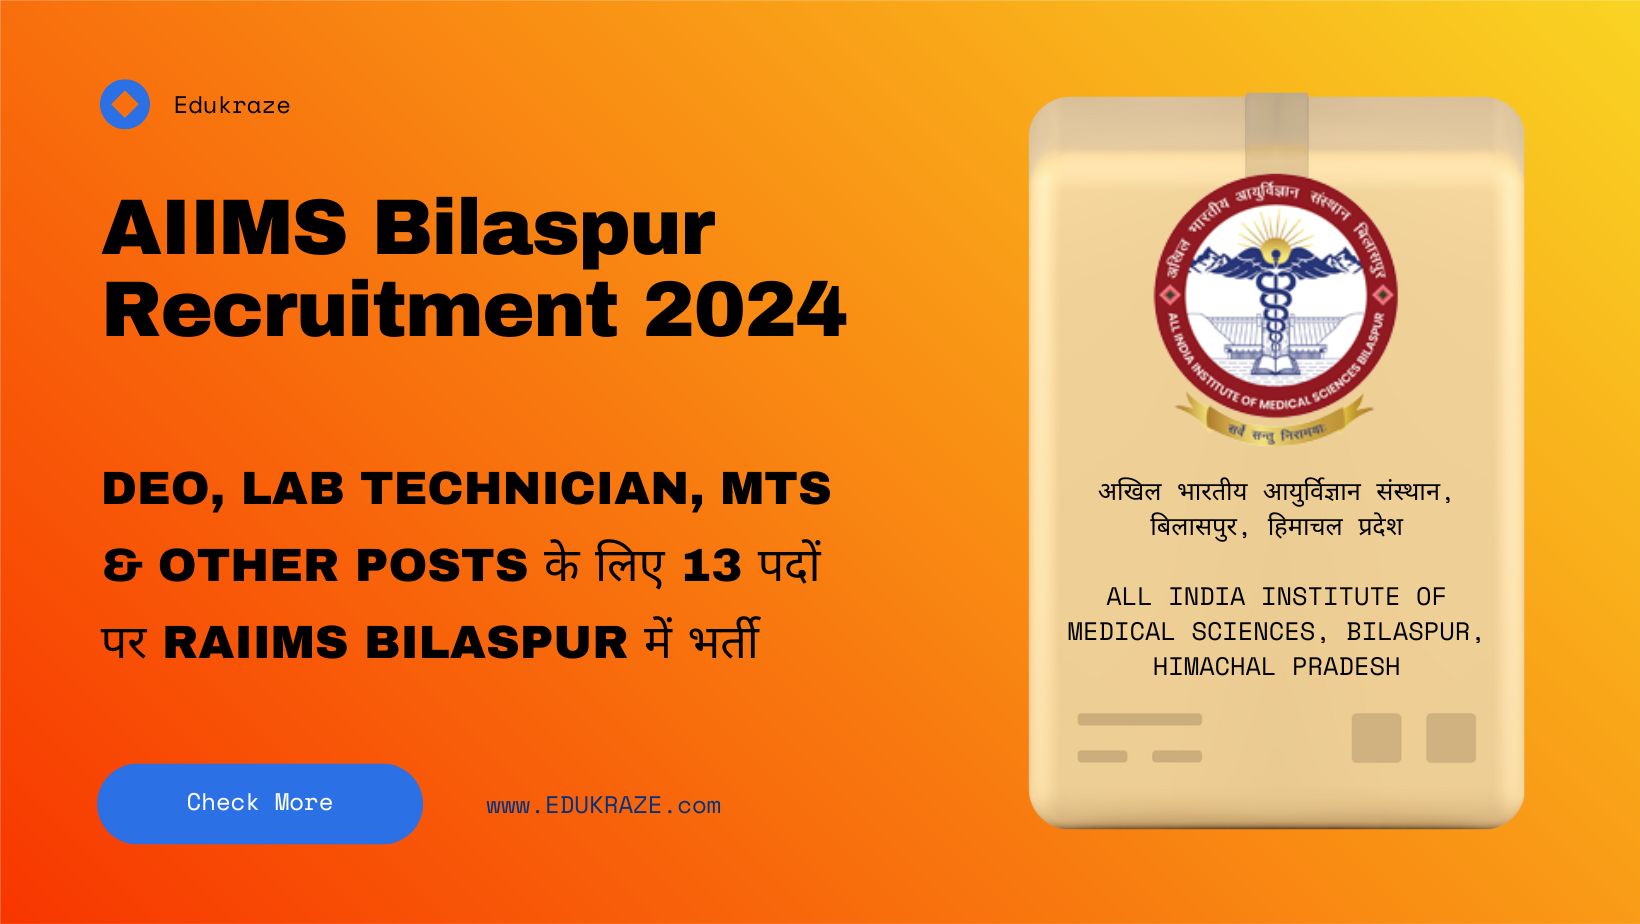 DEO, Lab Technician, MTS & Other Posts out at AIIMS Bilaspur Recruitment 2024